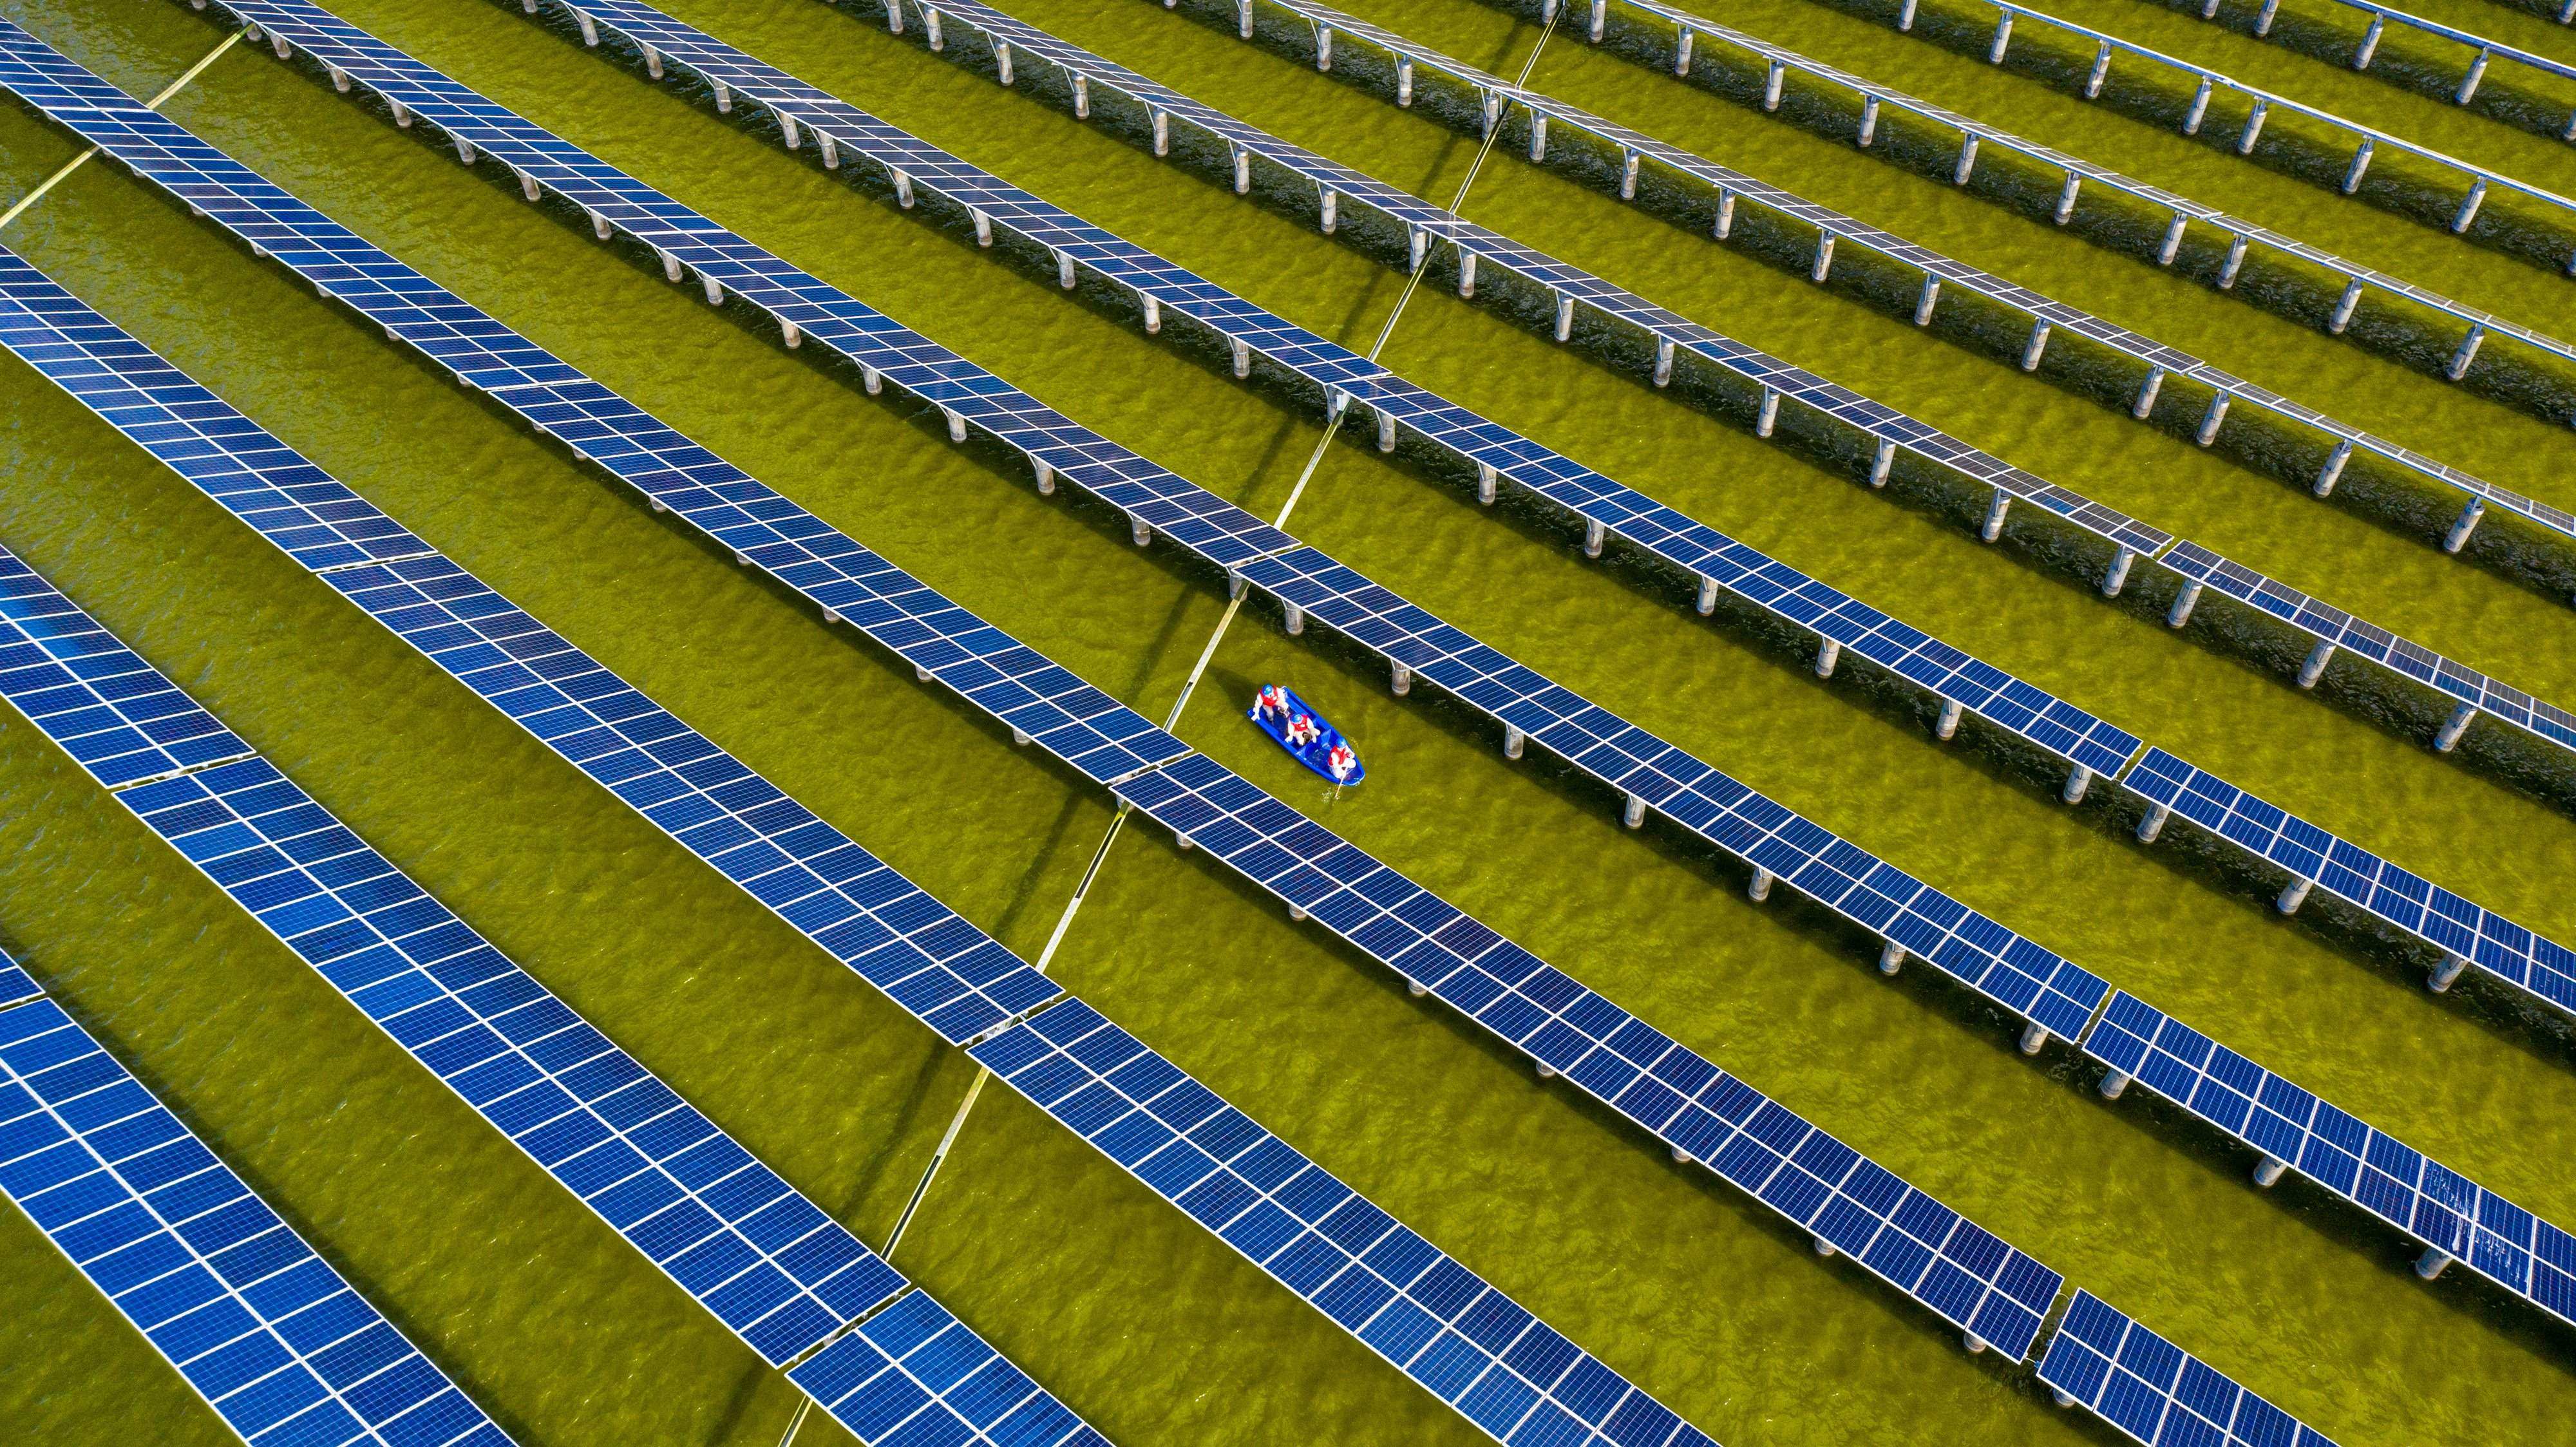 Electrical workers in a boat check solar panels at a photovoltaic power station built in a fishpond in Haian, eastern Jiangsu province, on July 19. Photo: AFP